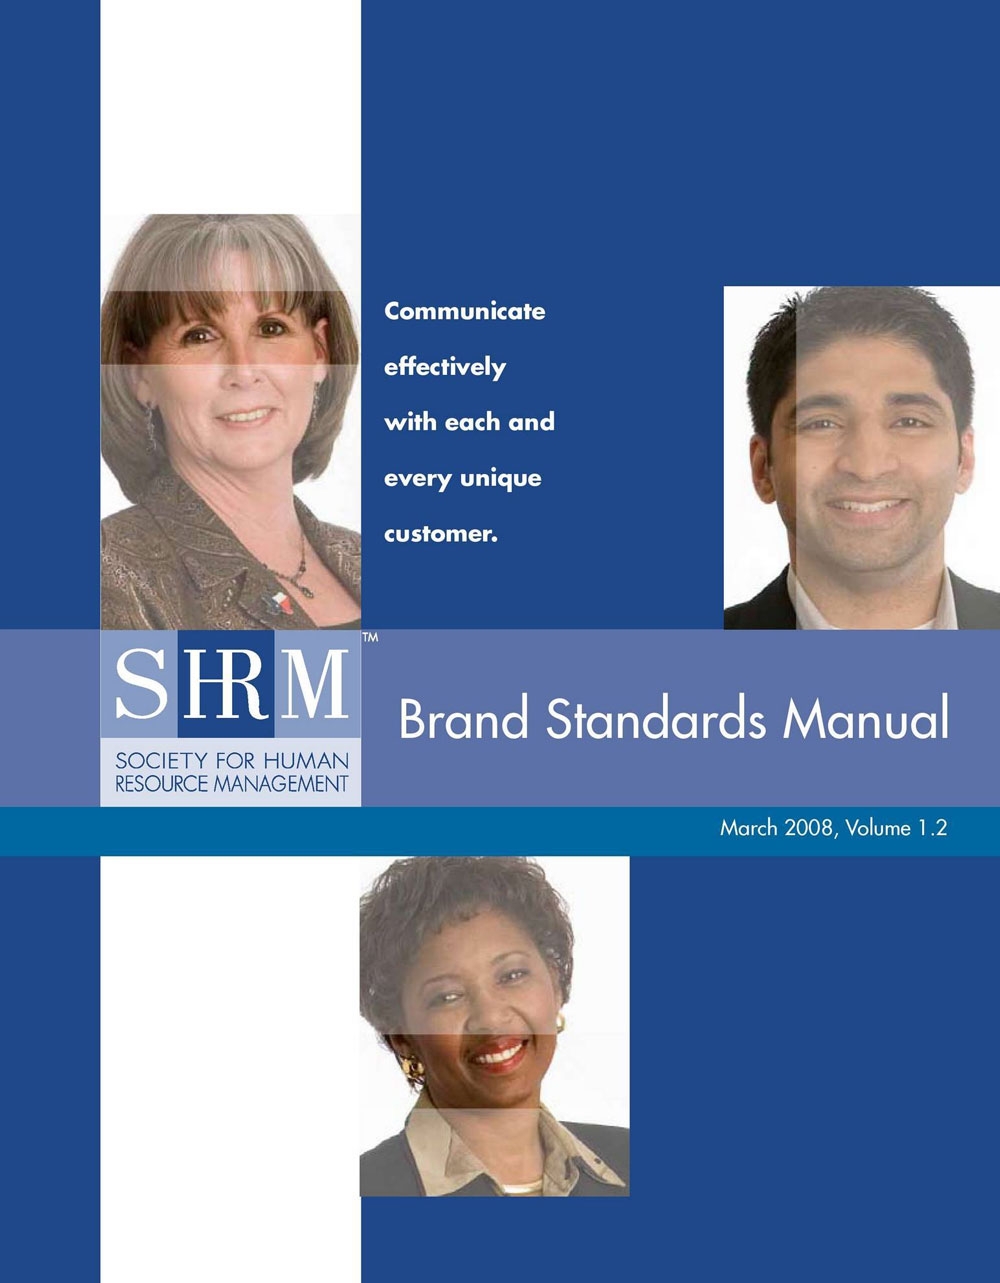 SHRM Society for Human Resource Management Brand Standards Manual